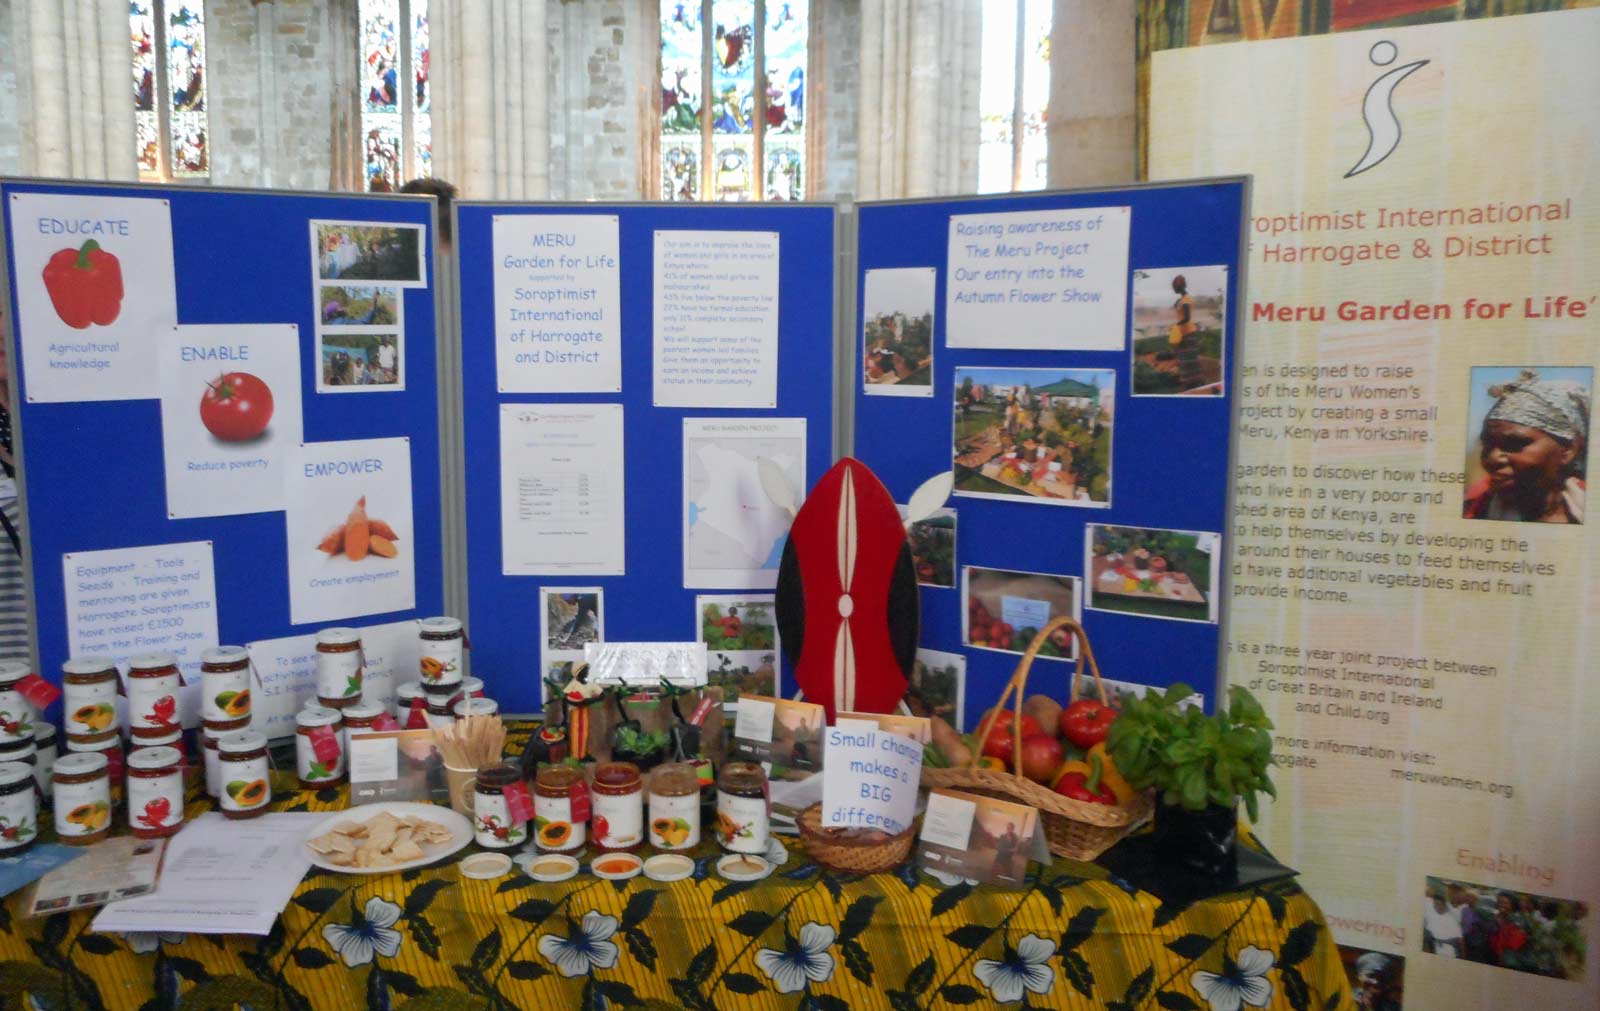 The Meru Women’s Garden Project Stand at the Ripon Home and Garden Event